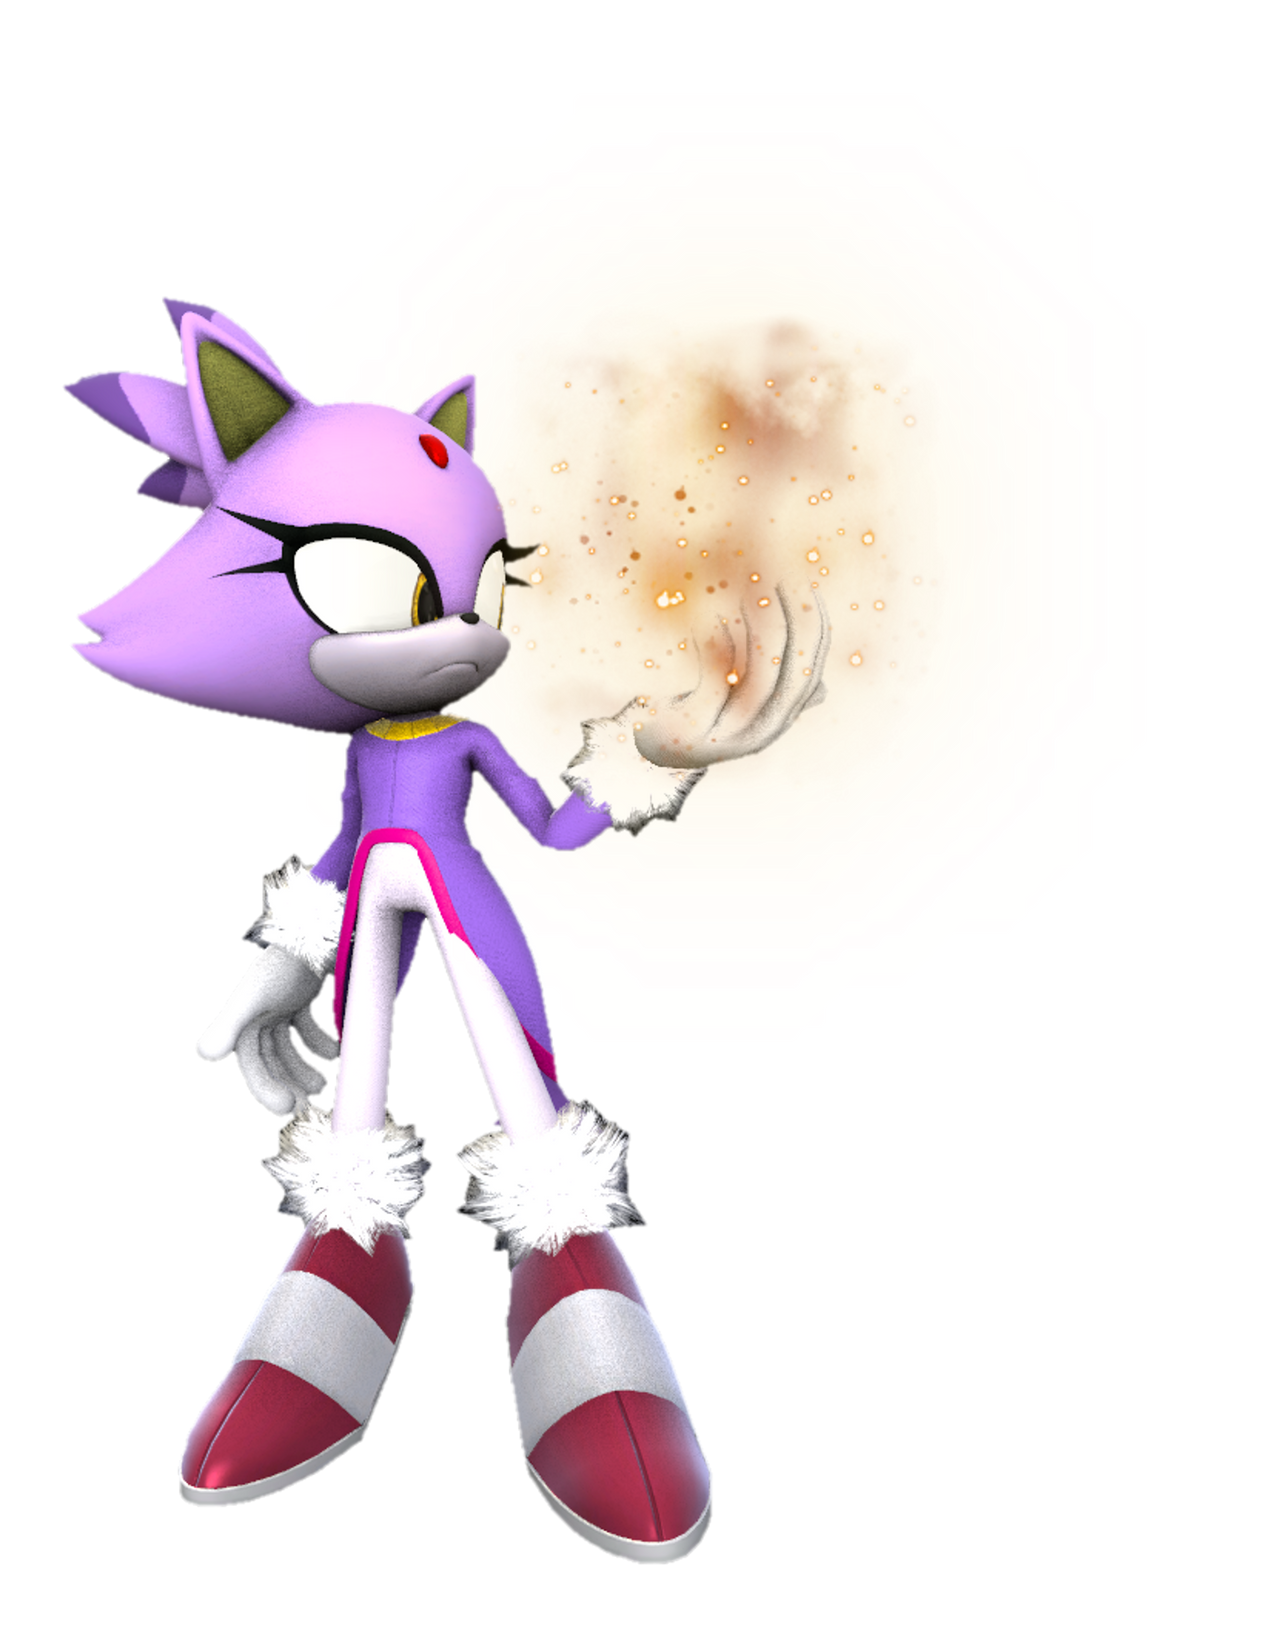 Blaze the Cat creating fire 2 by TransparentJiggly64 on DeviantArt